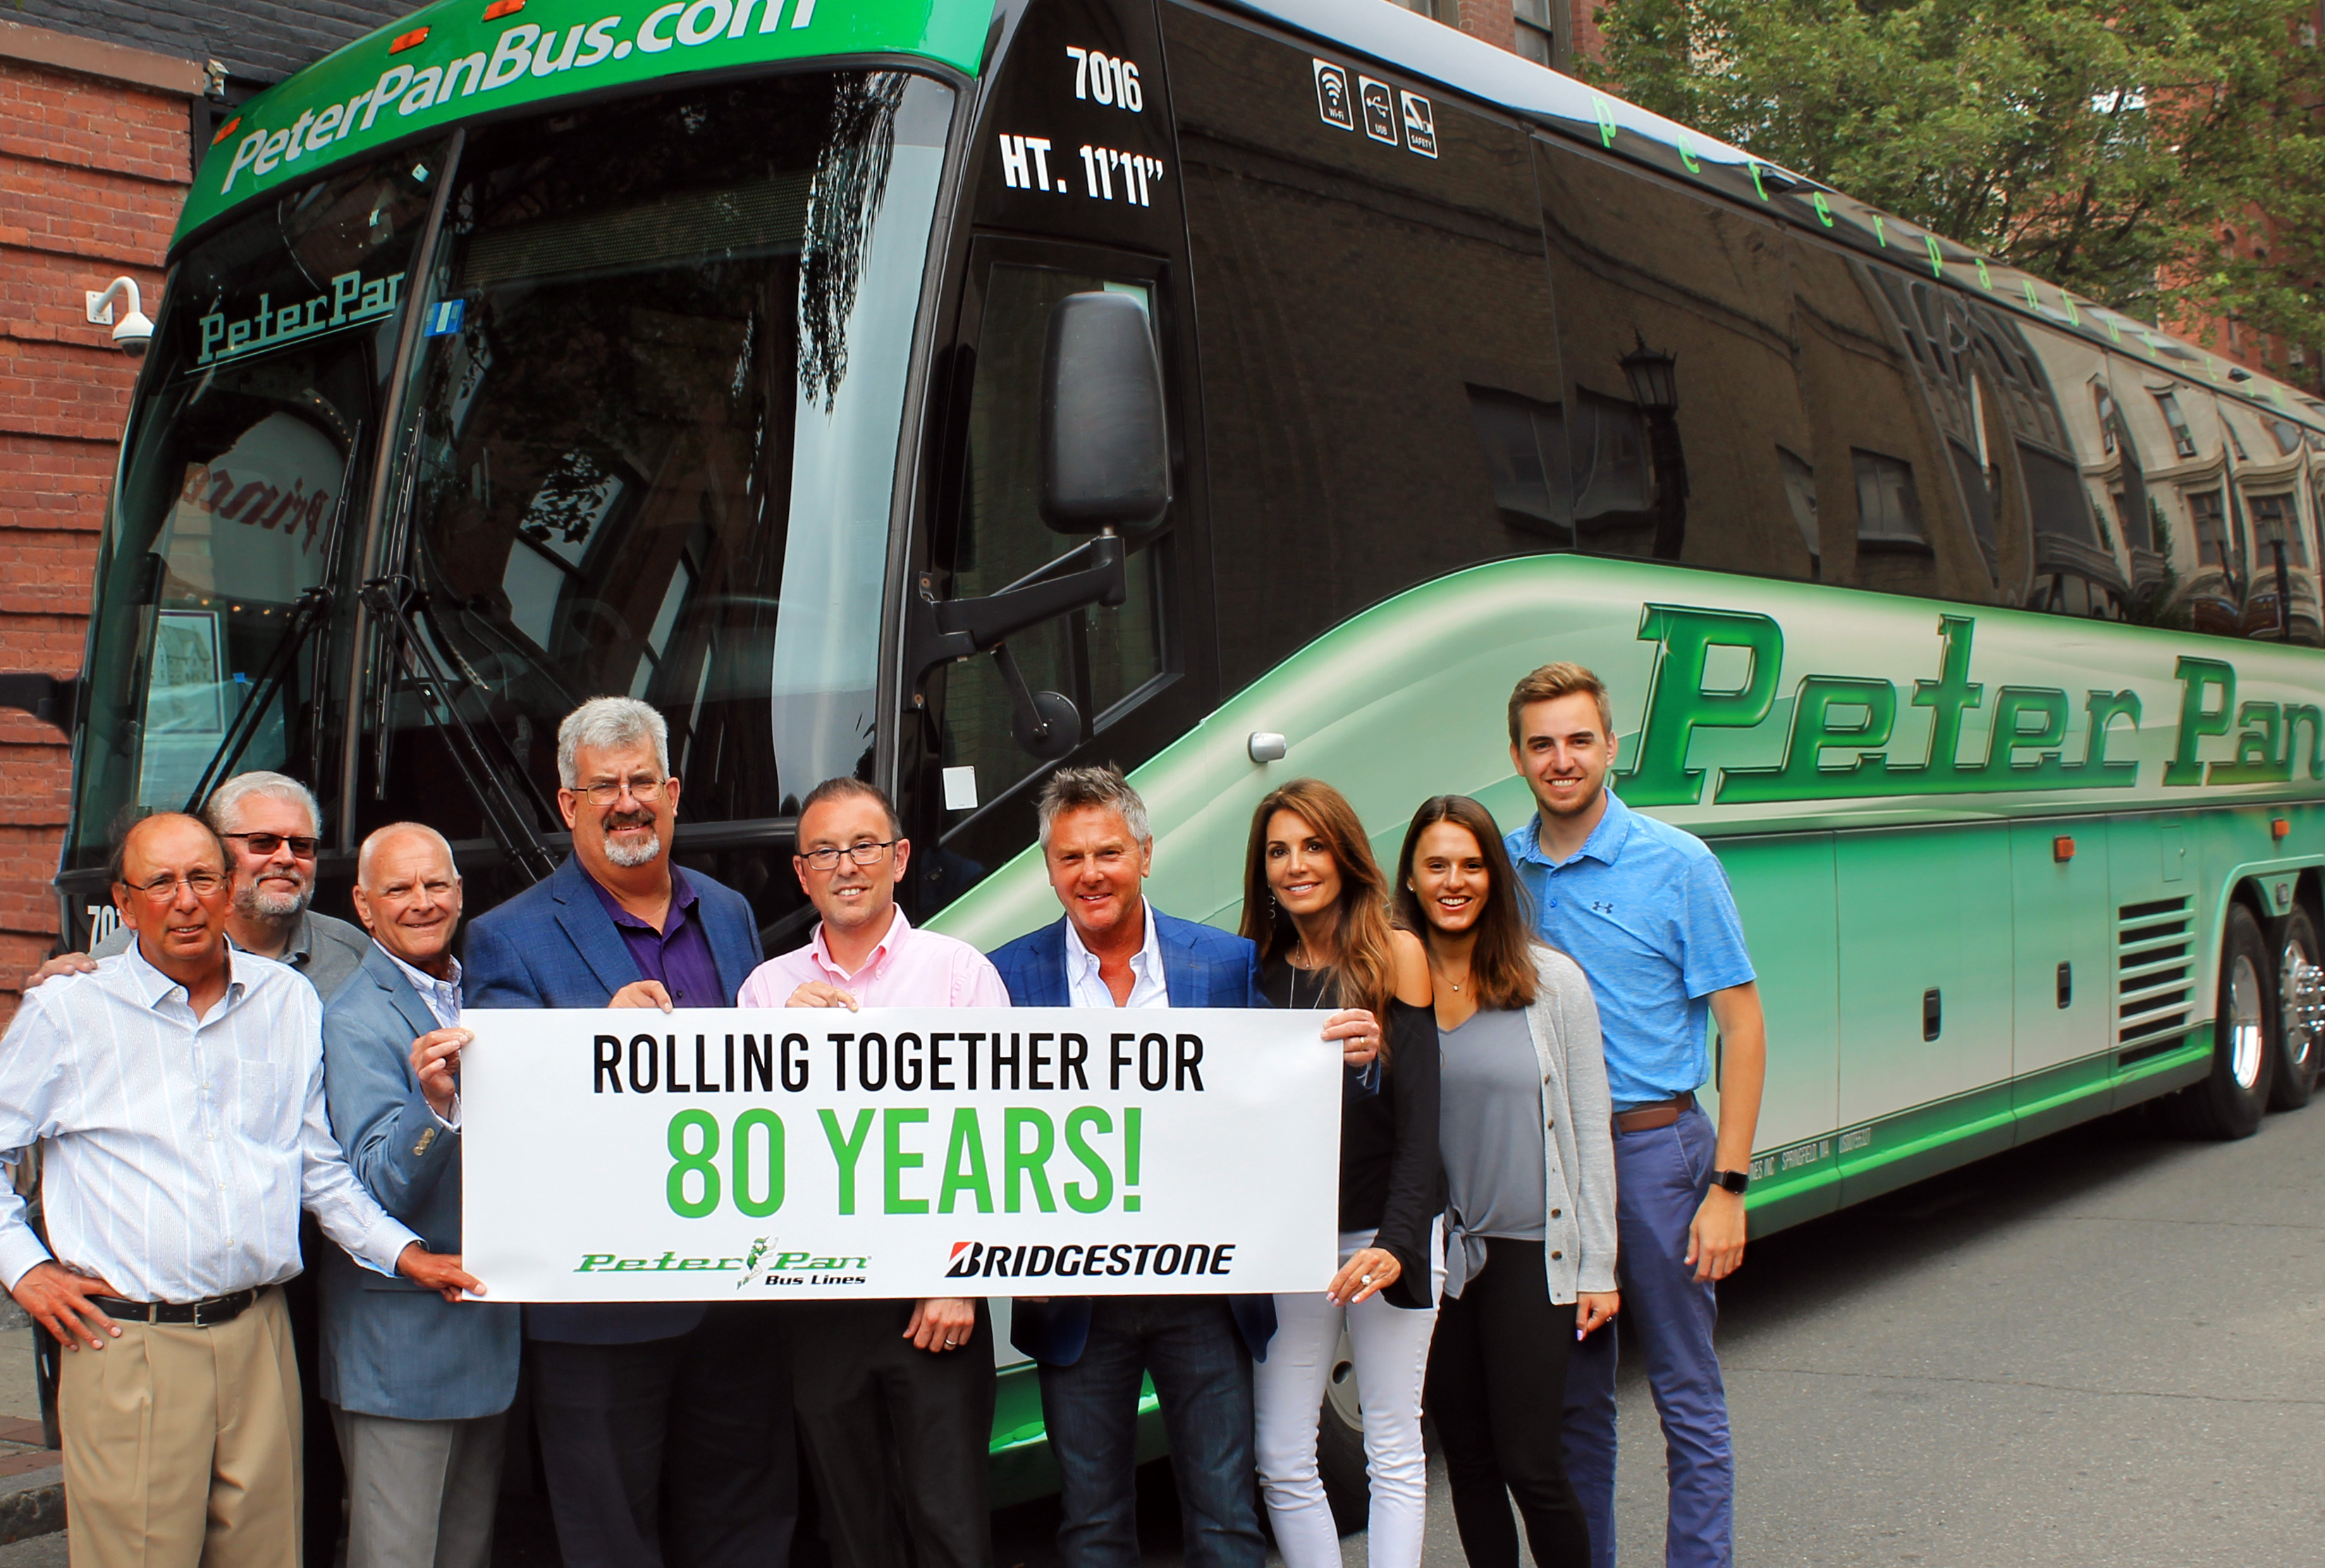 Peter Pan celebrates 80 years of rolling together with Firestone tires